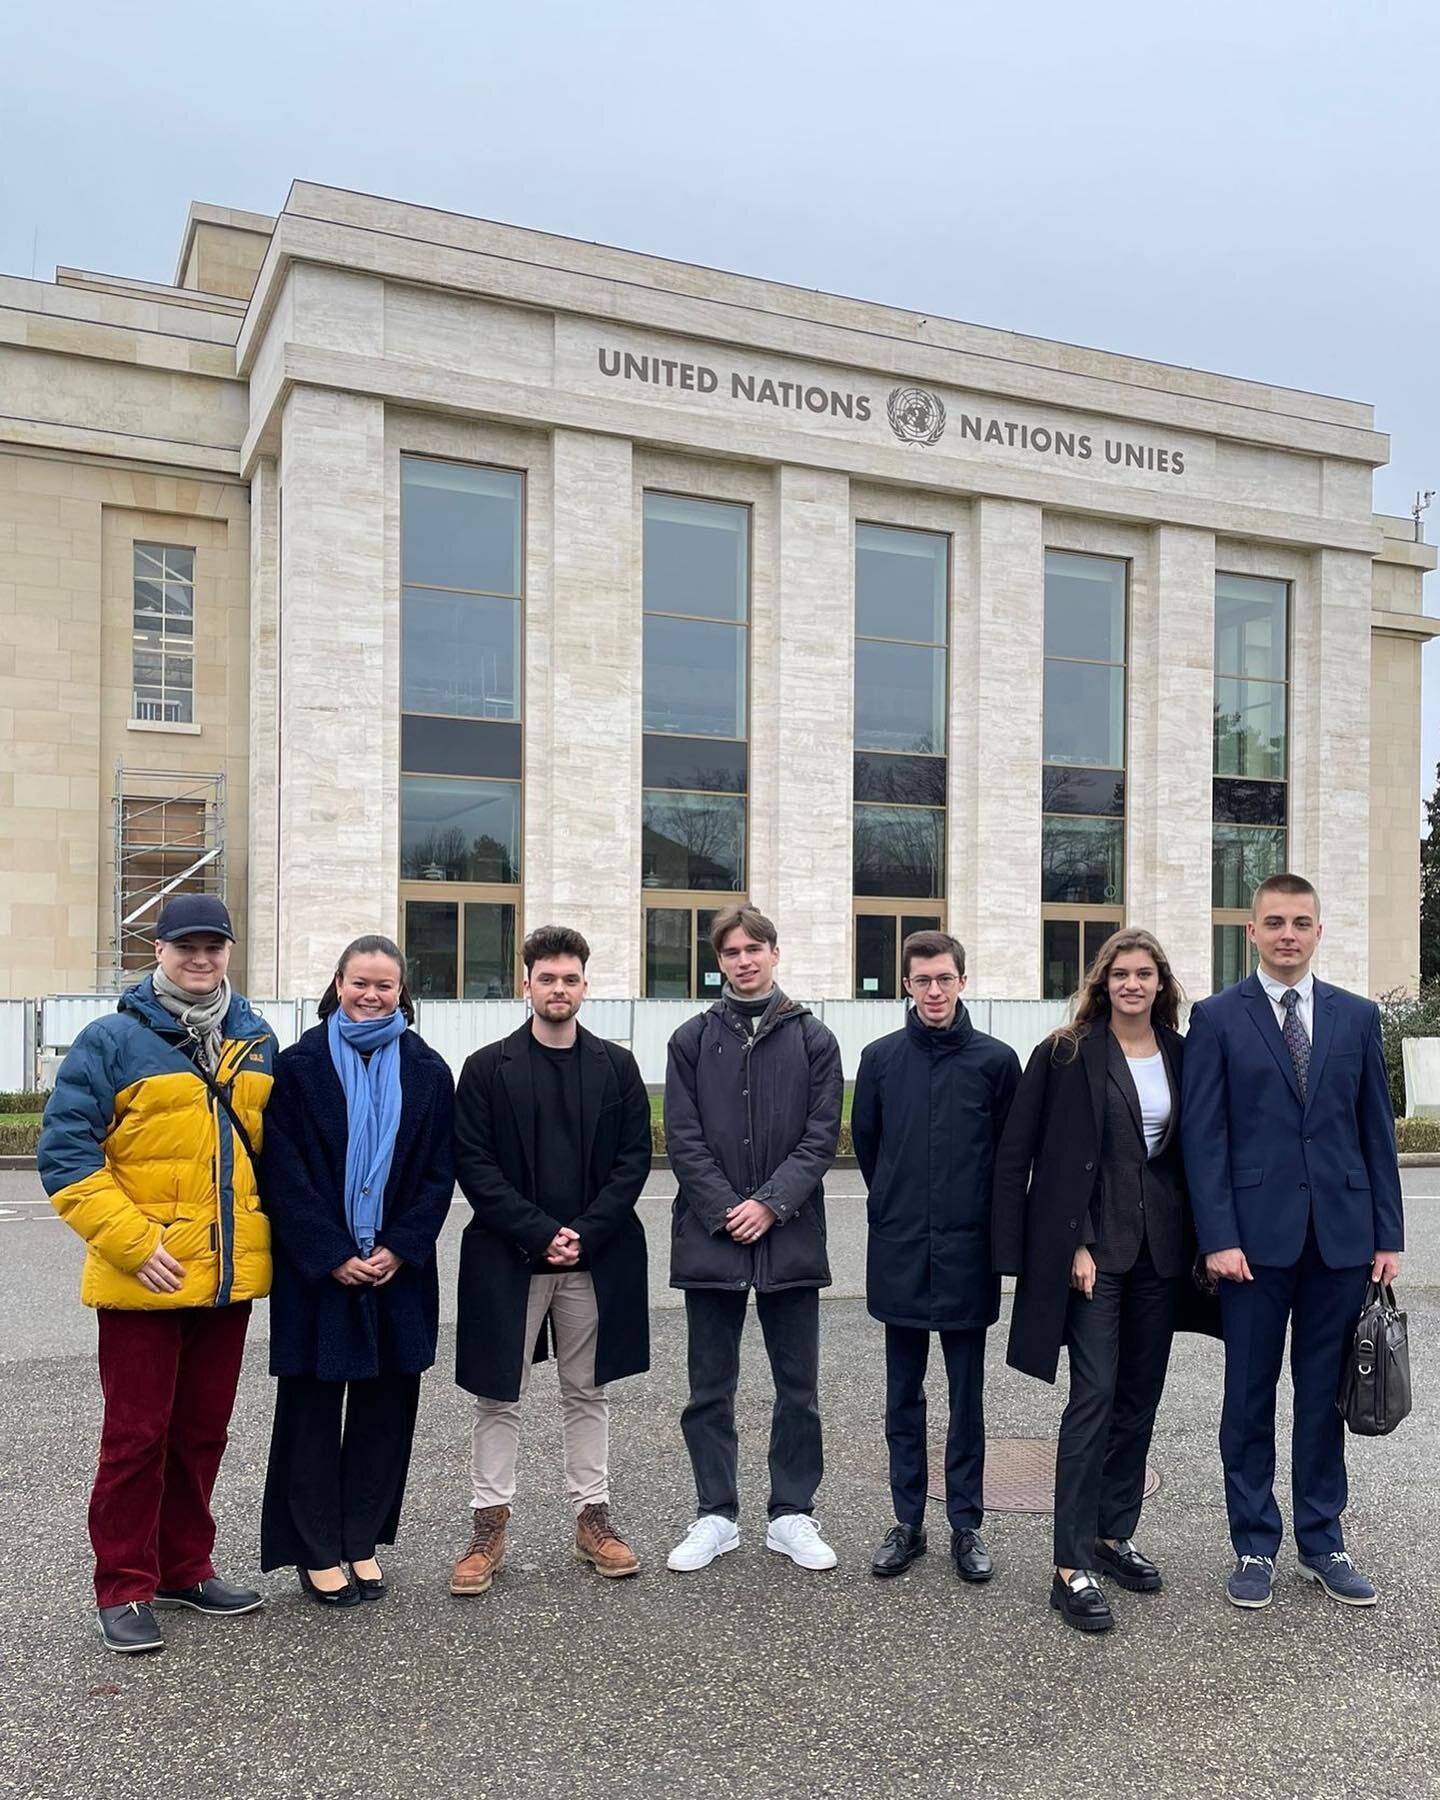 - Geneva Trip 2024 Recap - 

During the semester break a few of our members had the lovely opportunity to visit Geneva, an international hub for diplomacy and impactful decision making. Having arrived early on the 8th of February, we started our trip